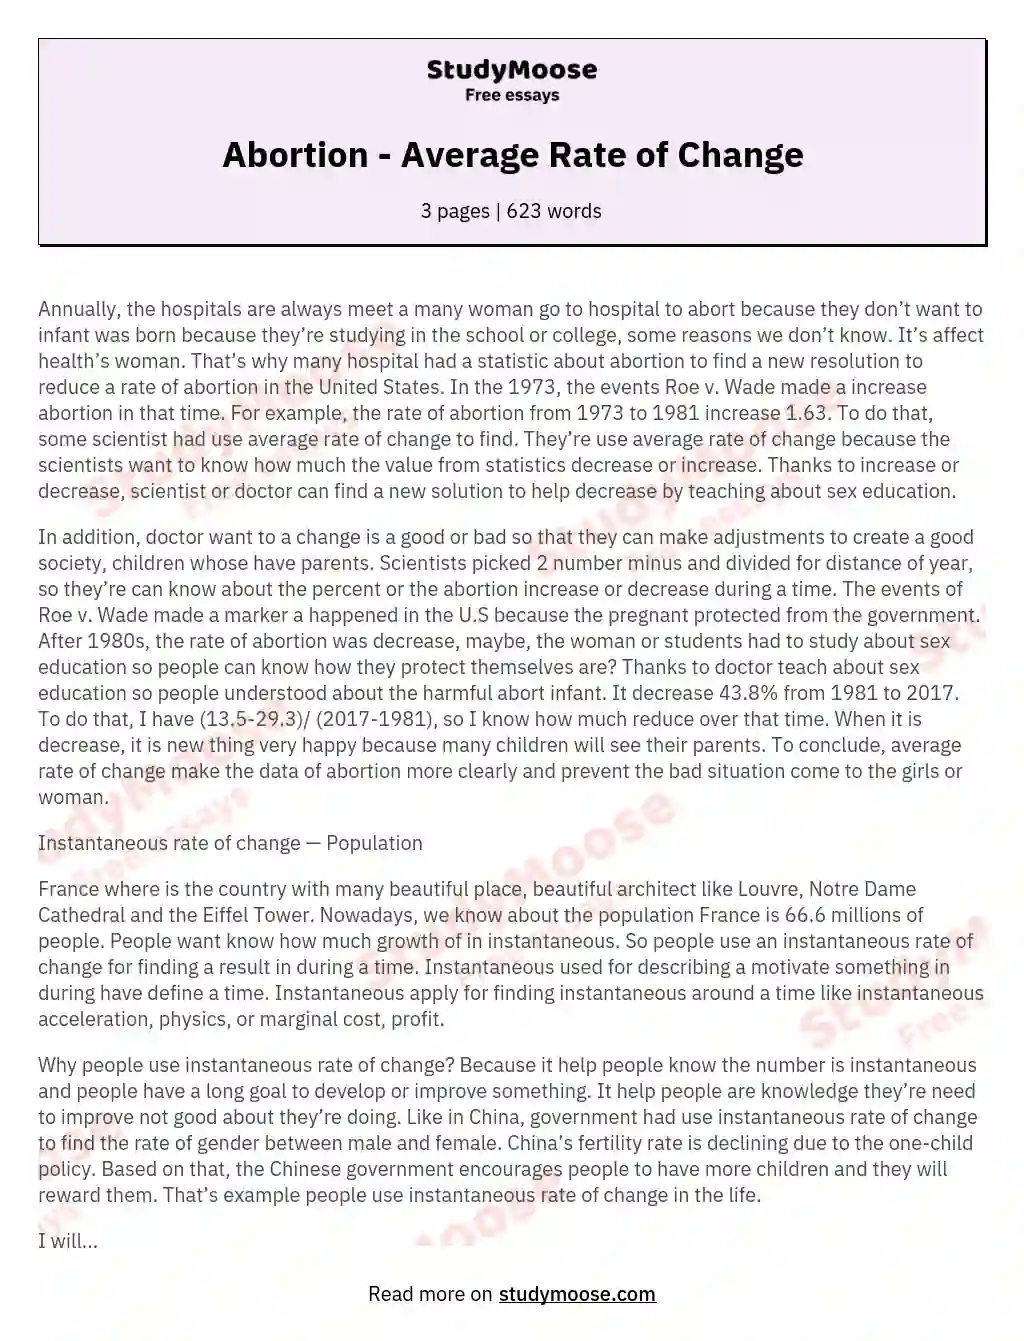 Abortion - Average Rate of Change essay